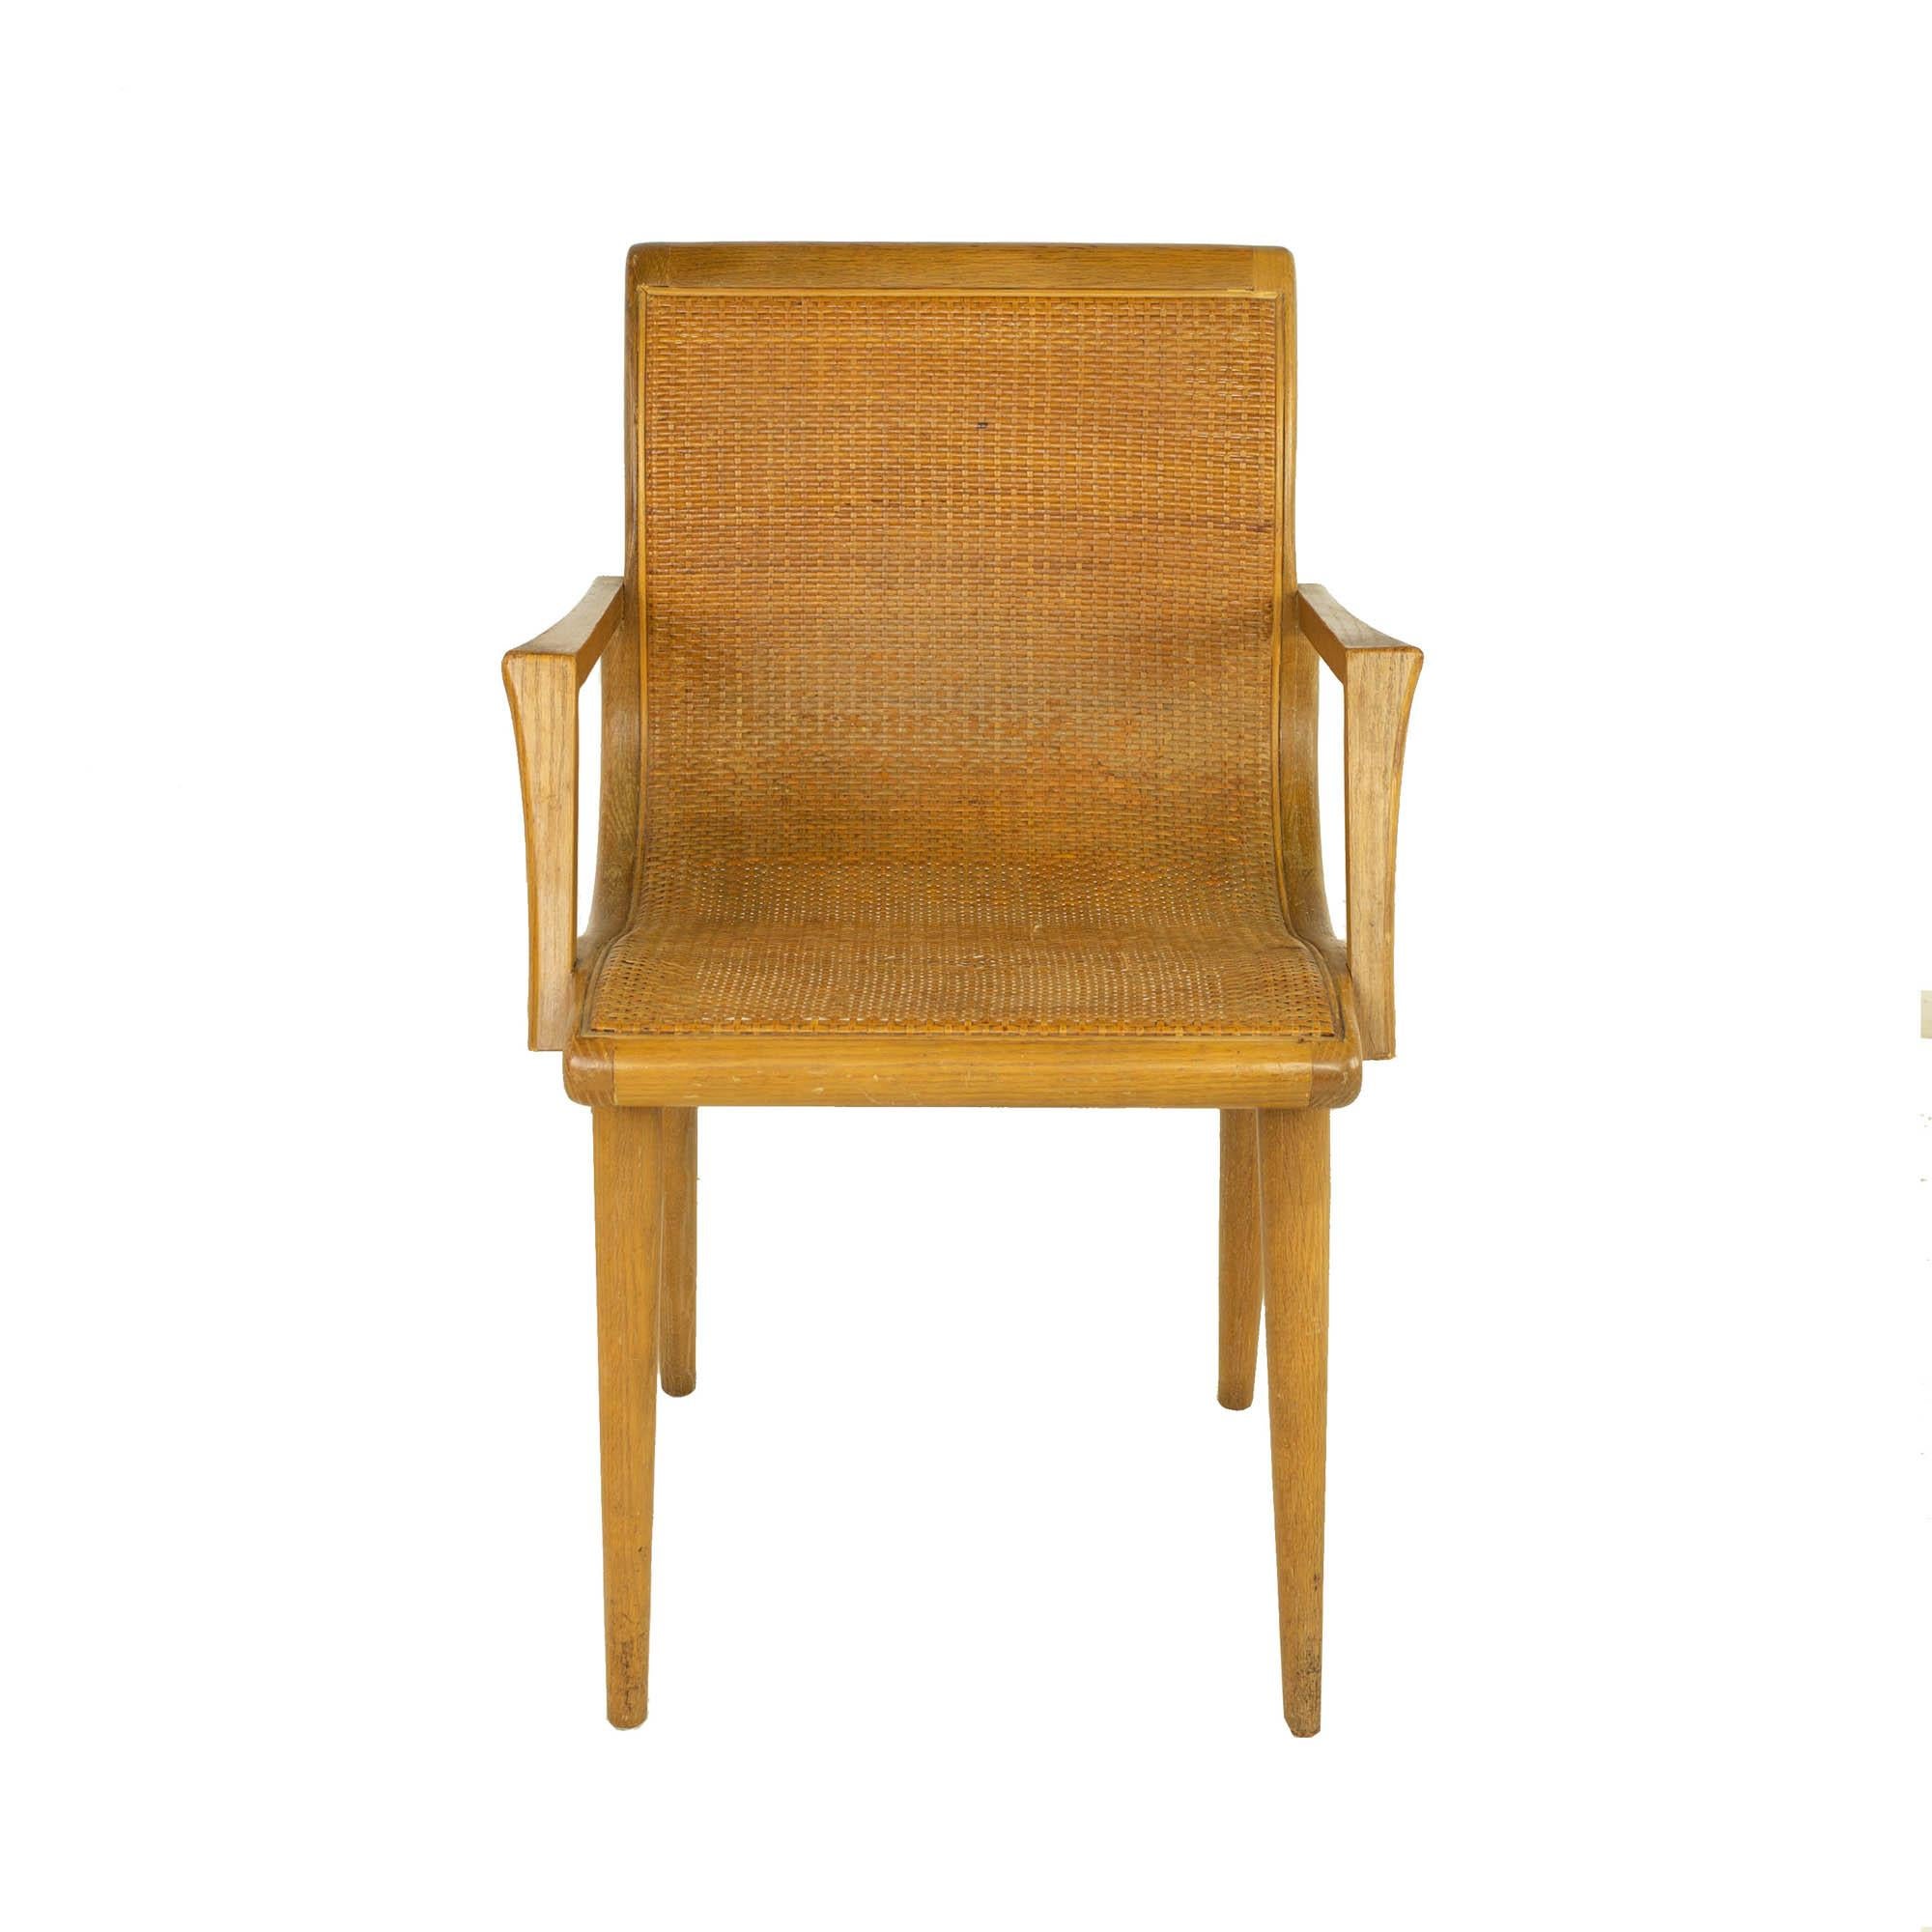 Mid Century Blonde Caned Dining Desk Chair

Chair measures: 22 wide x 22 deep x 34 high, with a seat height of 19 inches and arm height of 26 inches

?All pieces of furniture can be had in what we call restored vintage condition. That means the